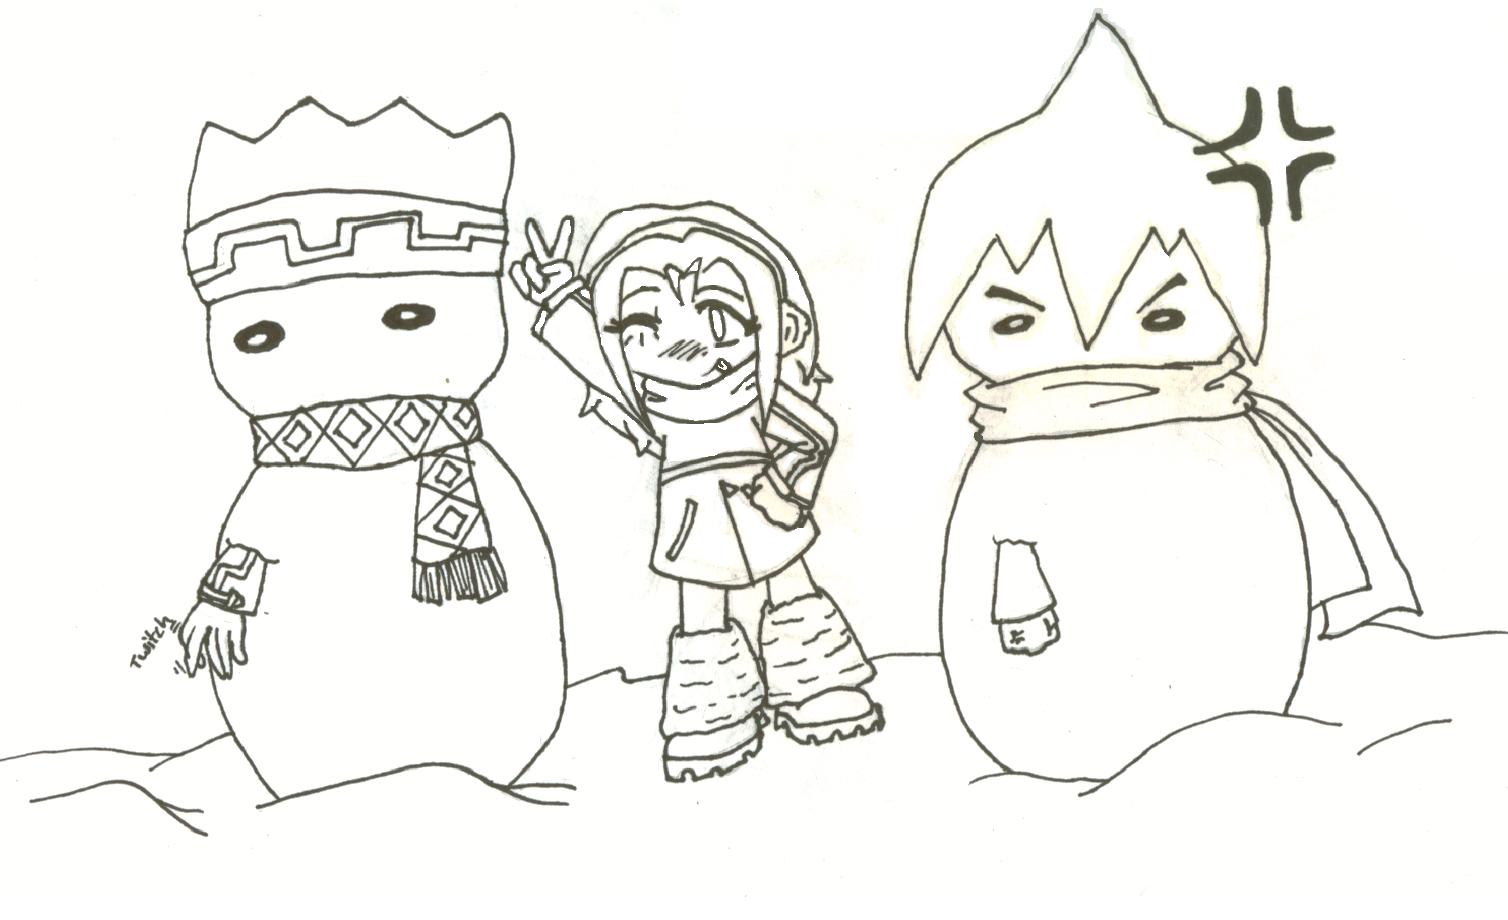 snowman love XD! by Tephy113